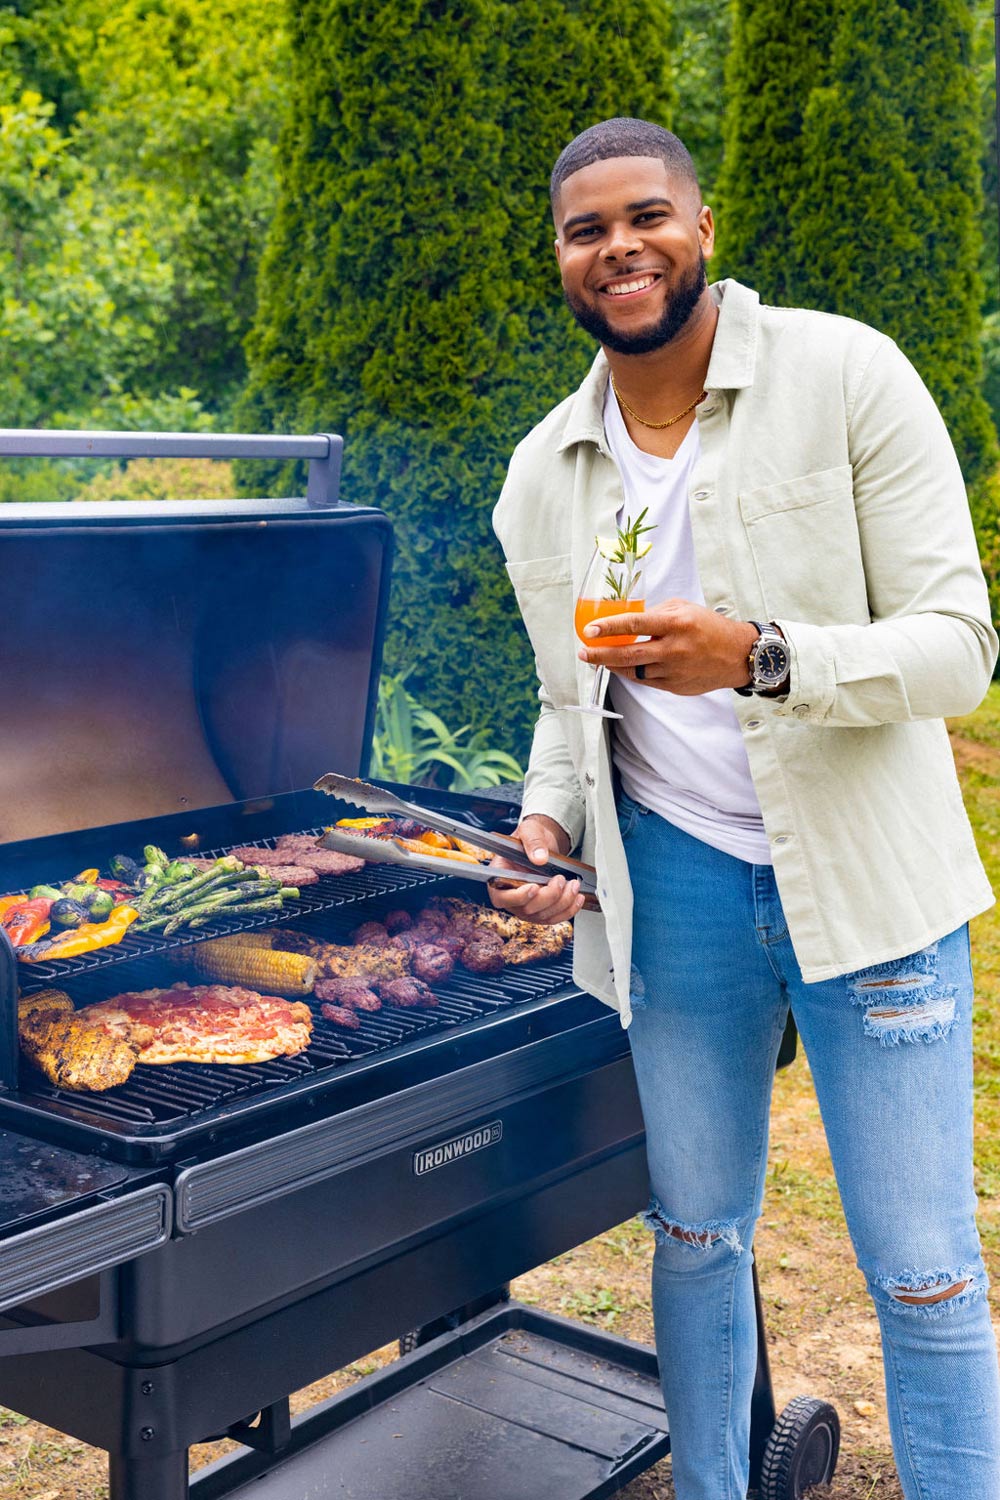 A man smiling and holding a mocktail, next to a grill filled an assortment of foods.